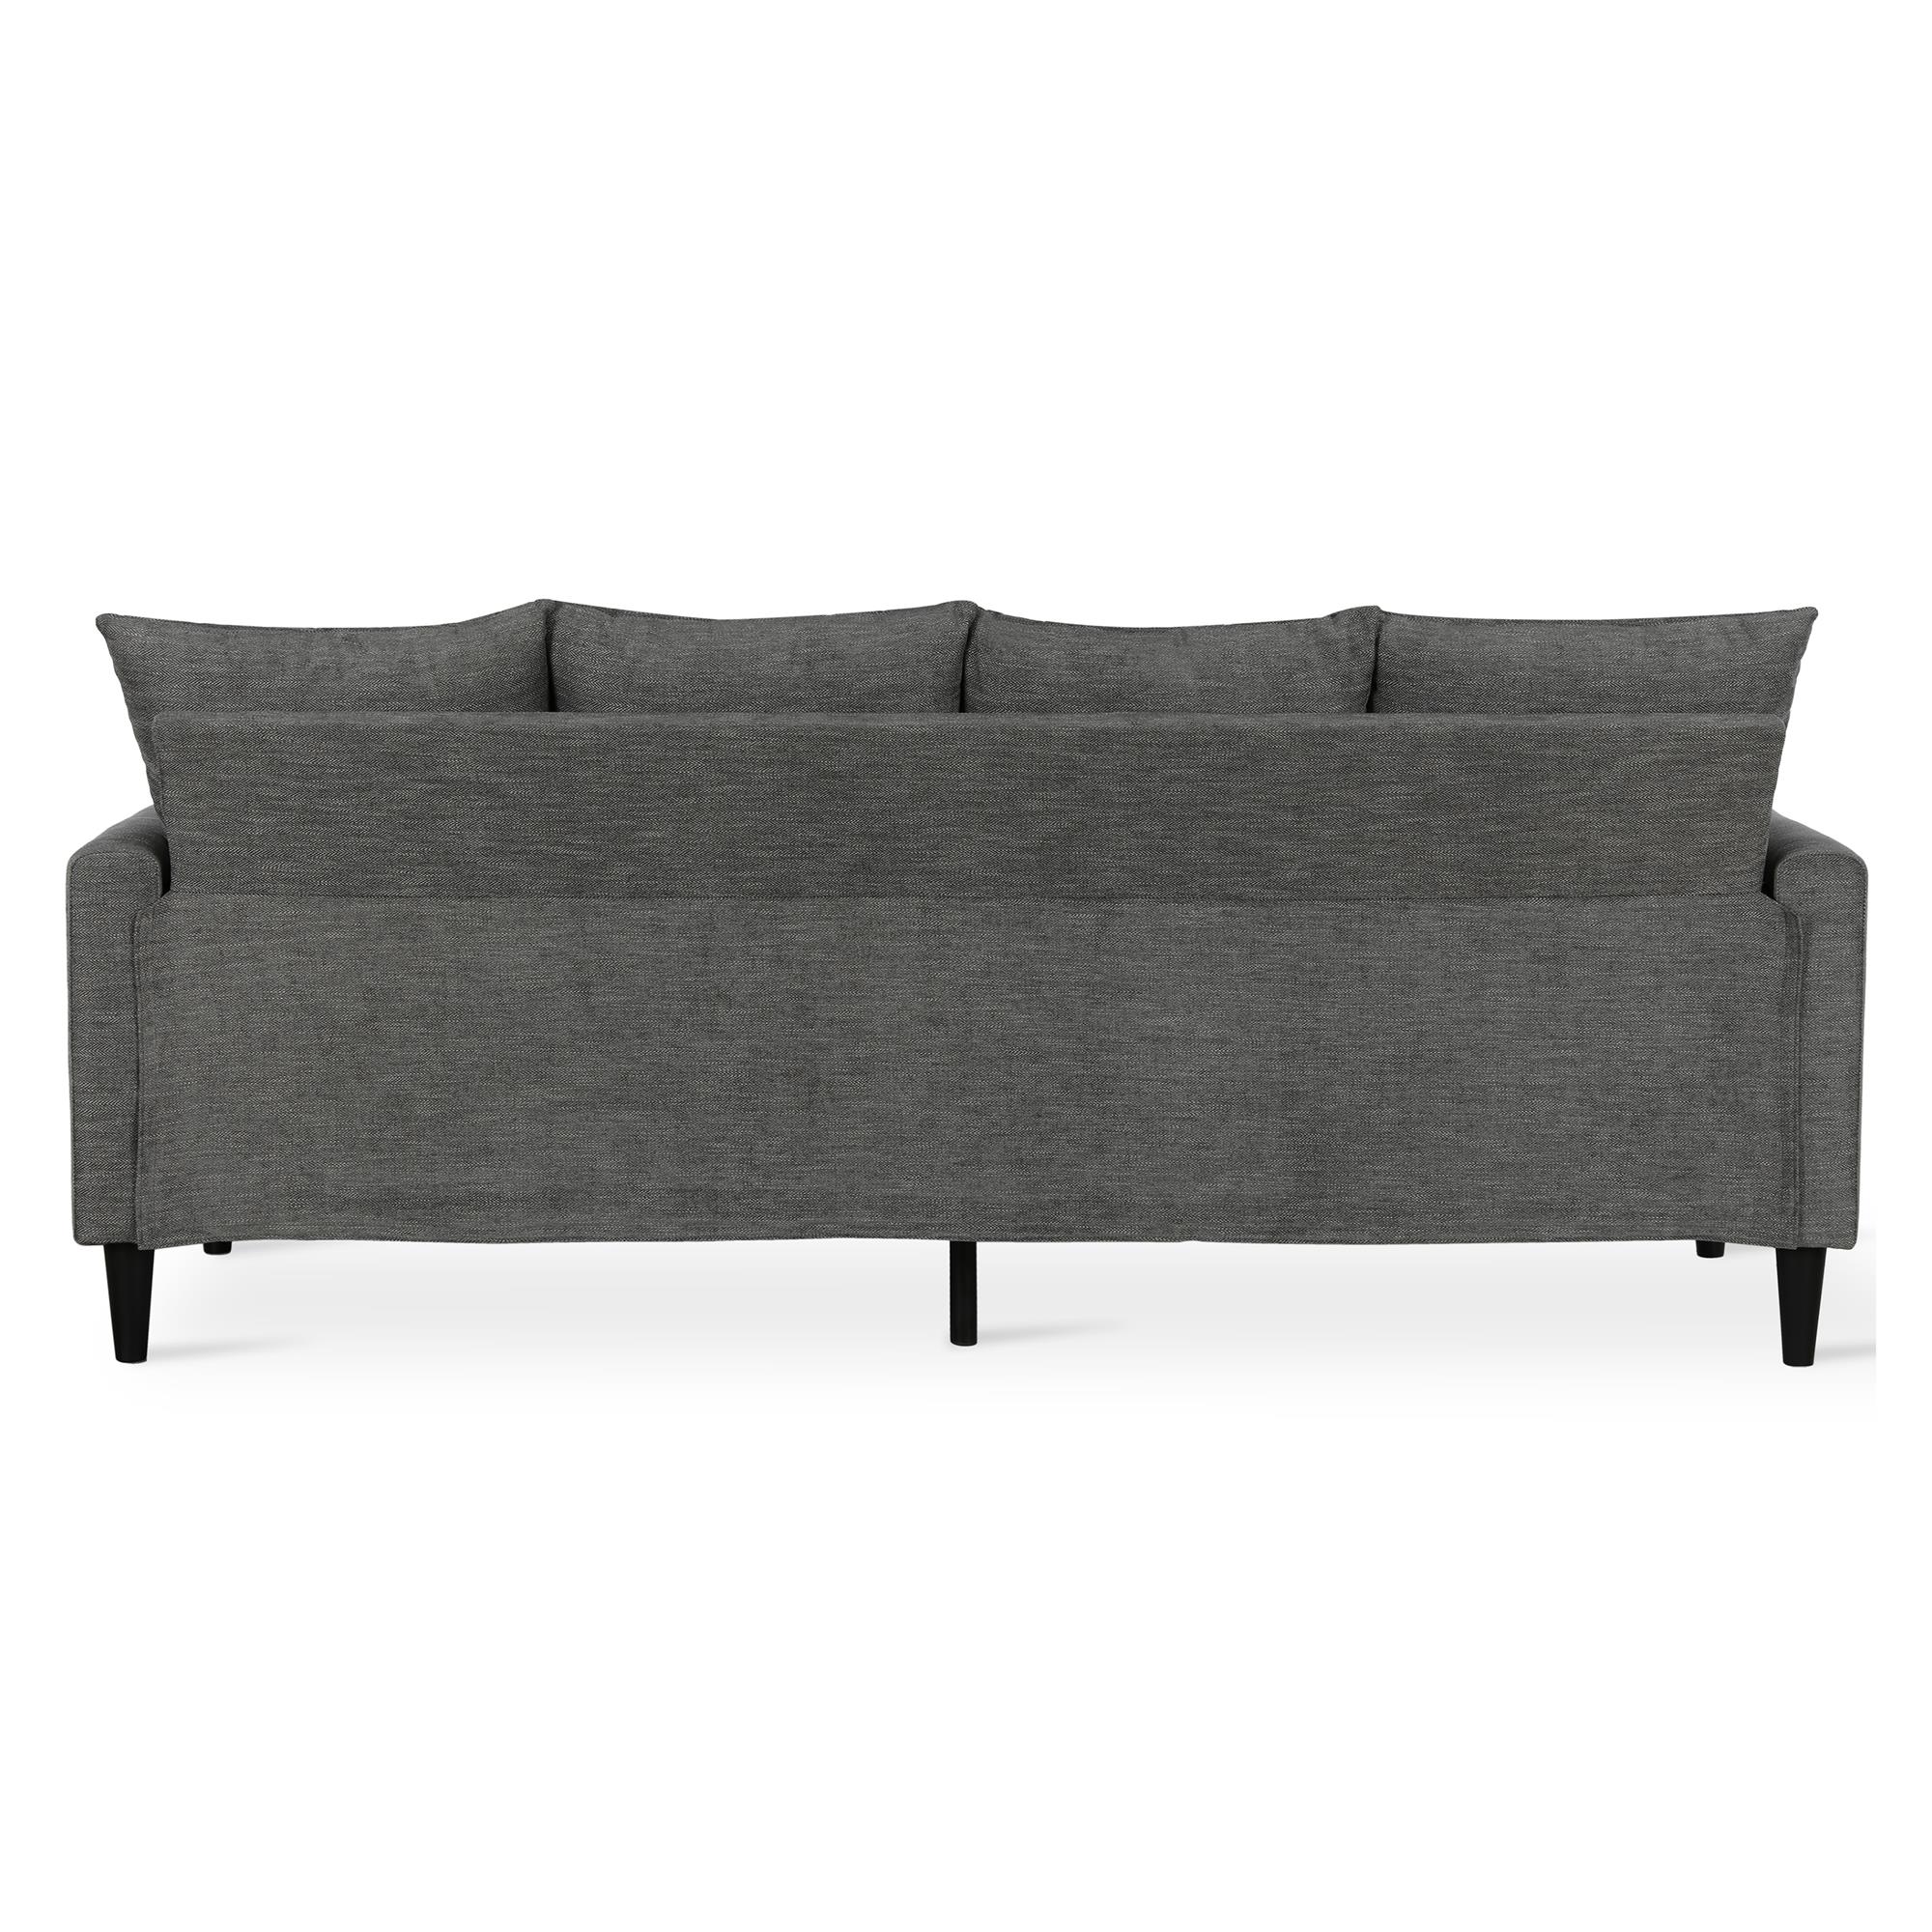 DHP Keaton Reversible Sectional with Pillows, Gray - image 2 of 14